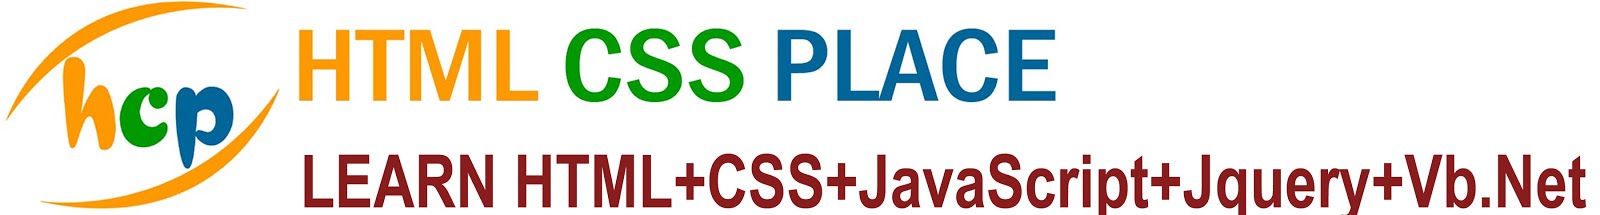 HTML CSS Place